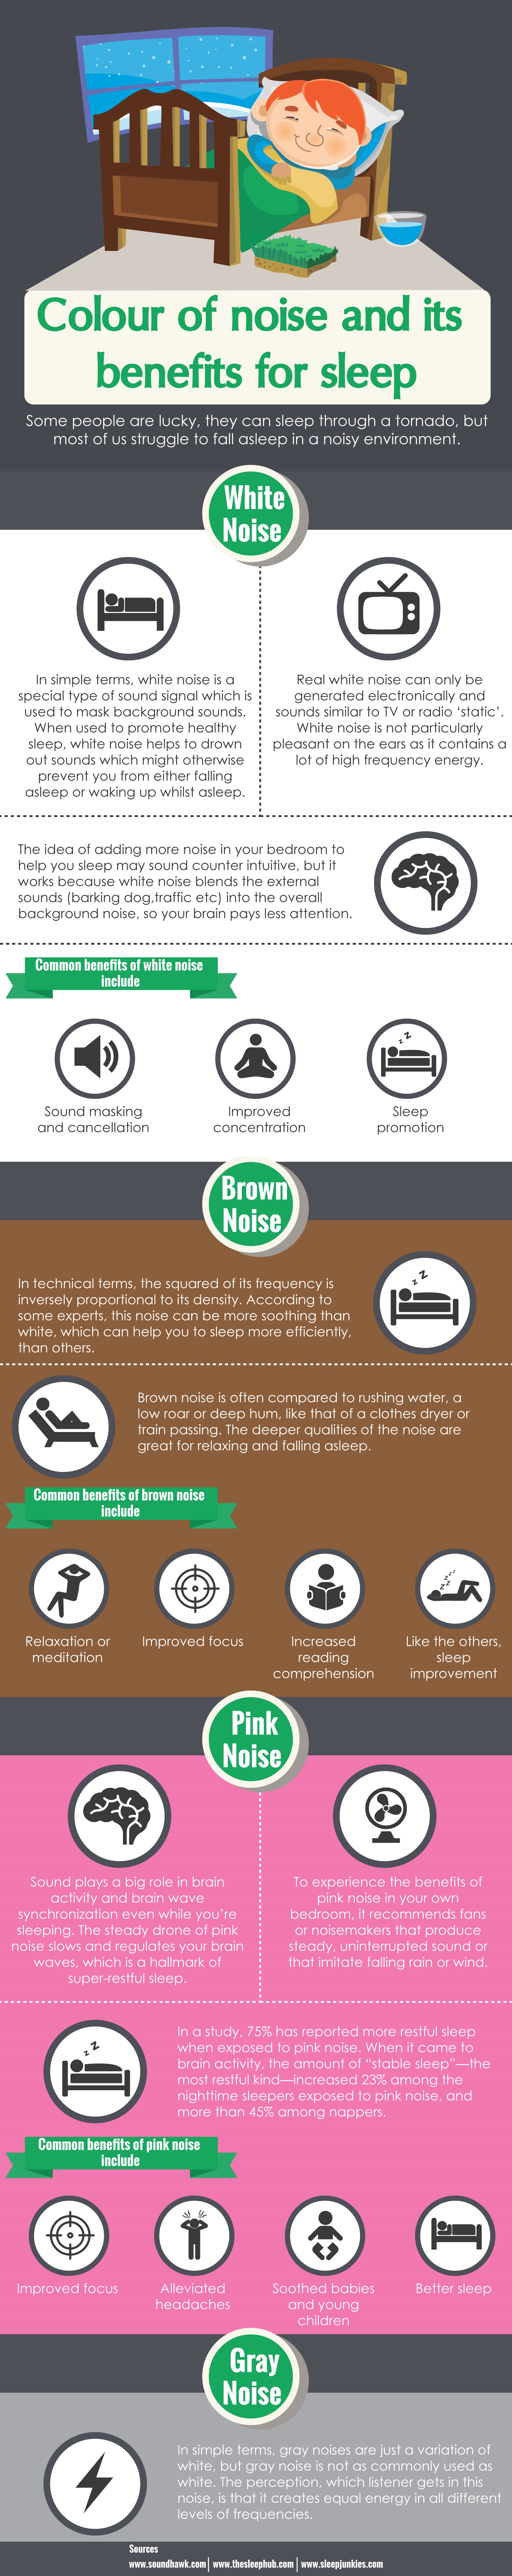 Brown Noise vs. White Noise: Which Is Best for Quality Sleep?